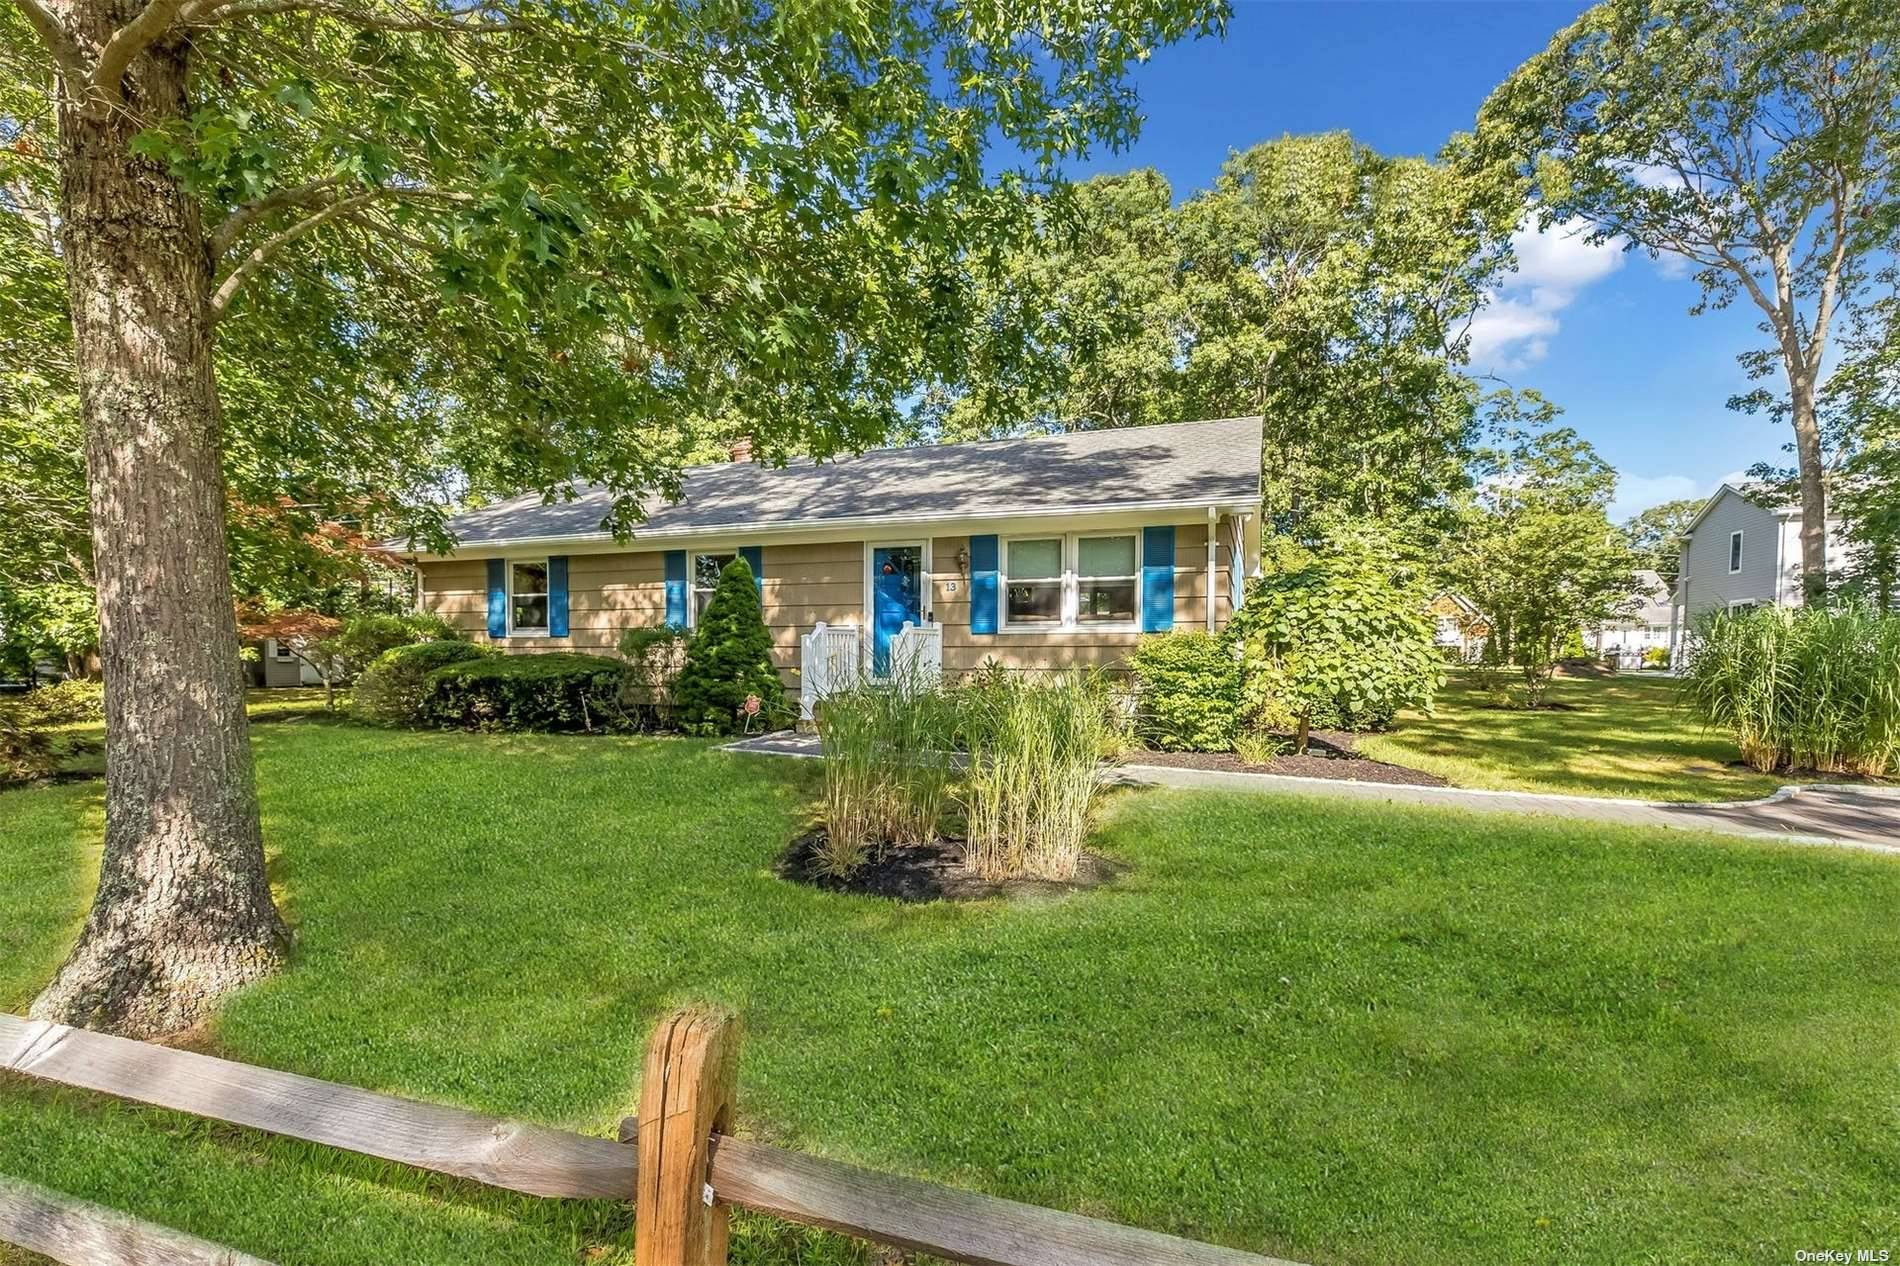 Perfect ranch home south of the highway in a very desirable area of East Quogue.